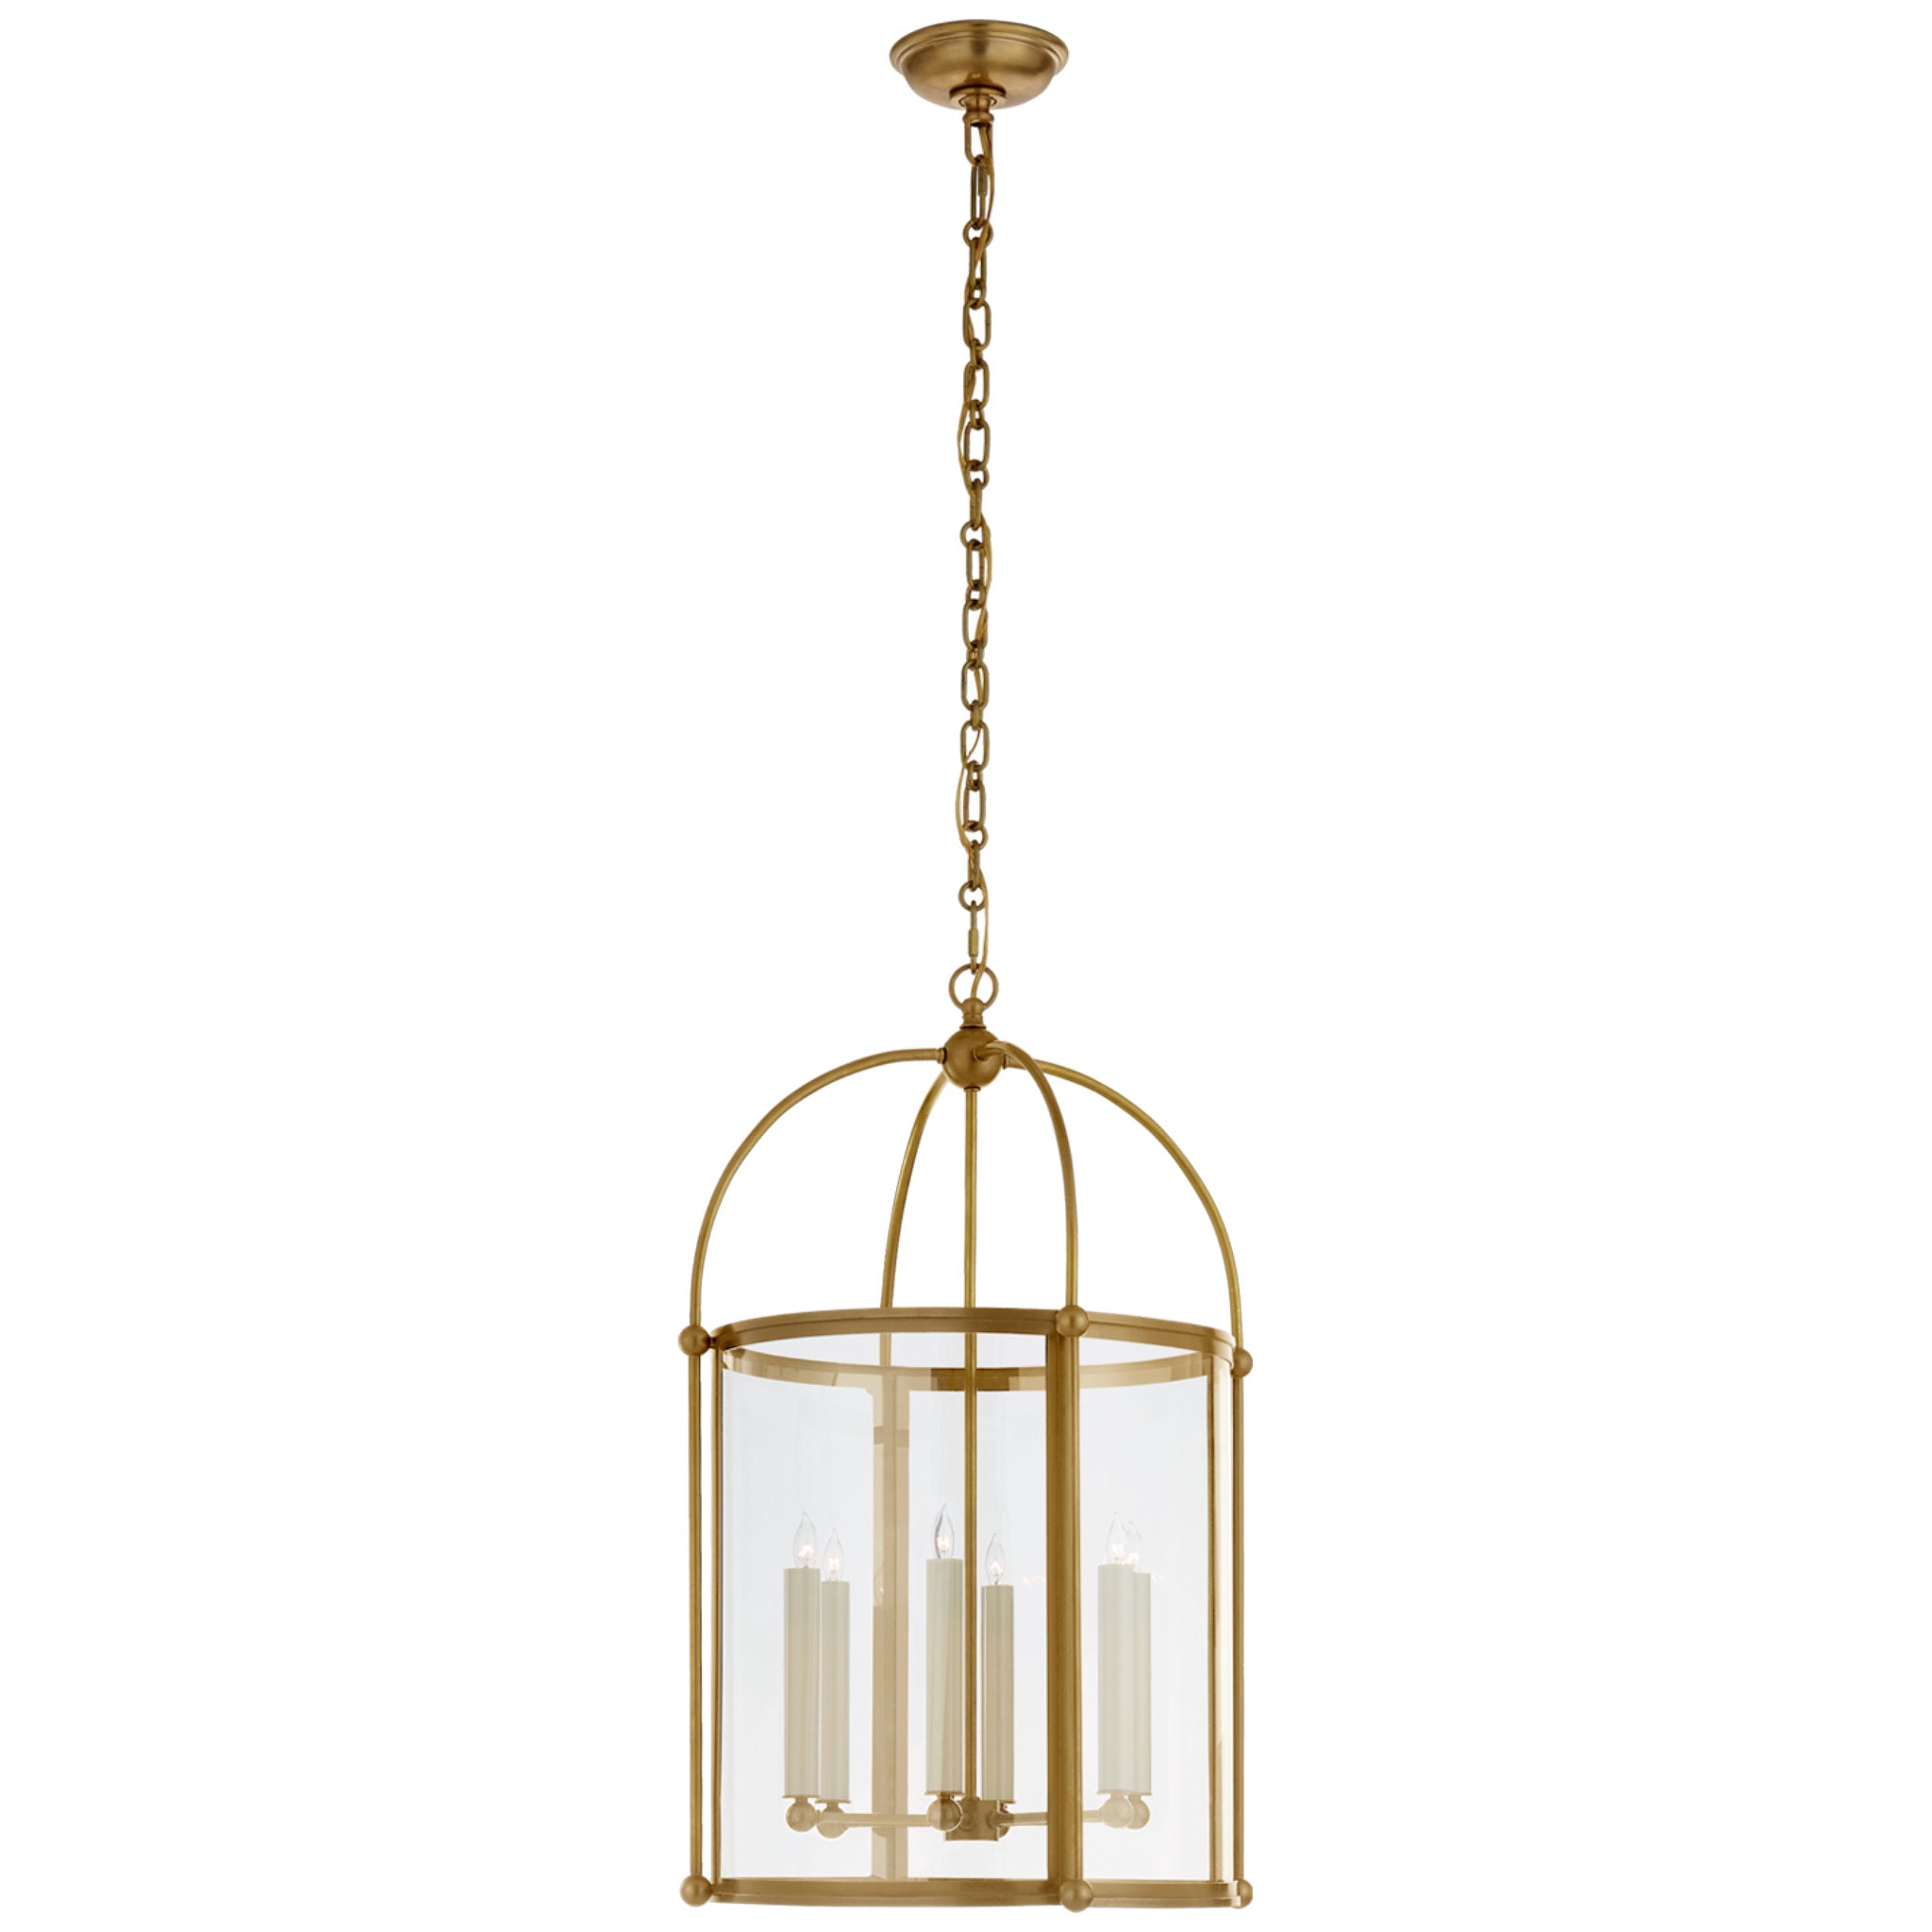 Chapman & Myers Riverside Medium Round Lantern in Antique-Burnished Brass with Clear Glass